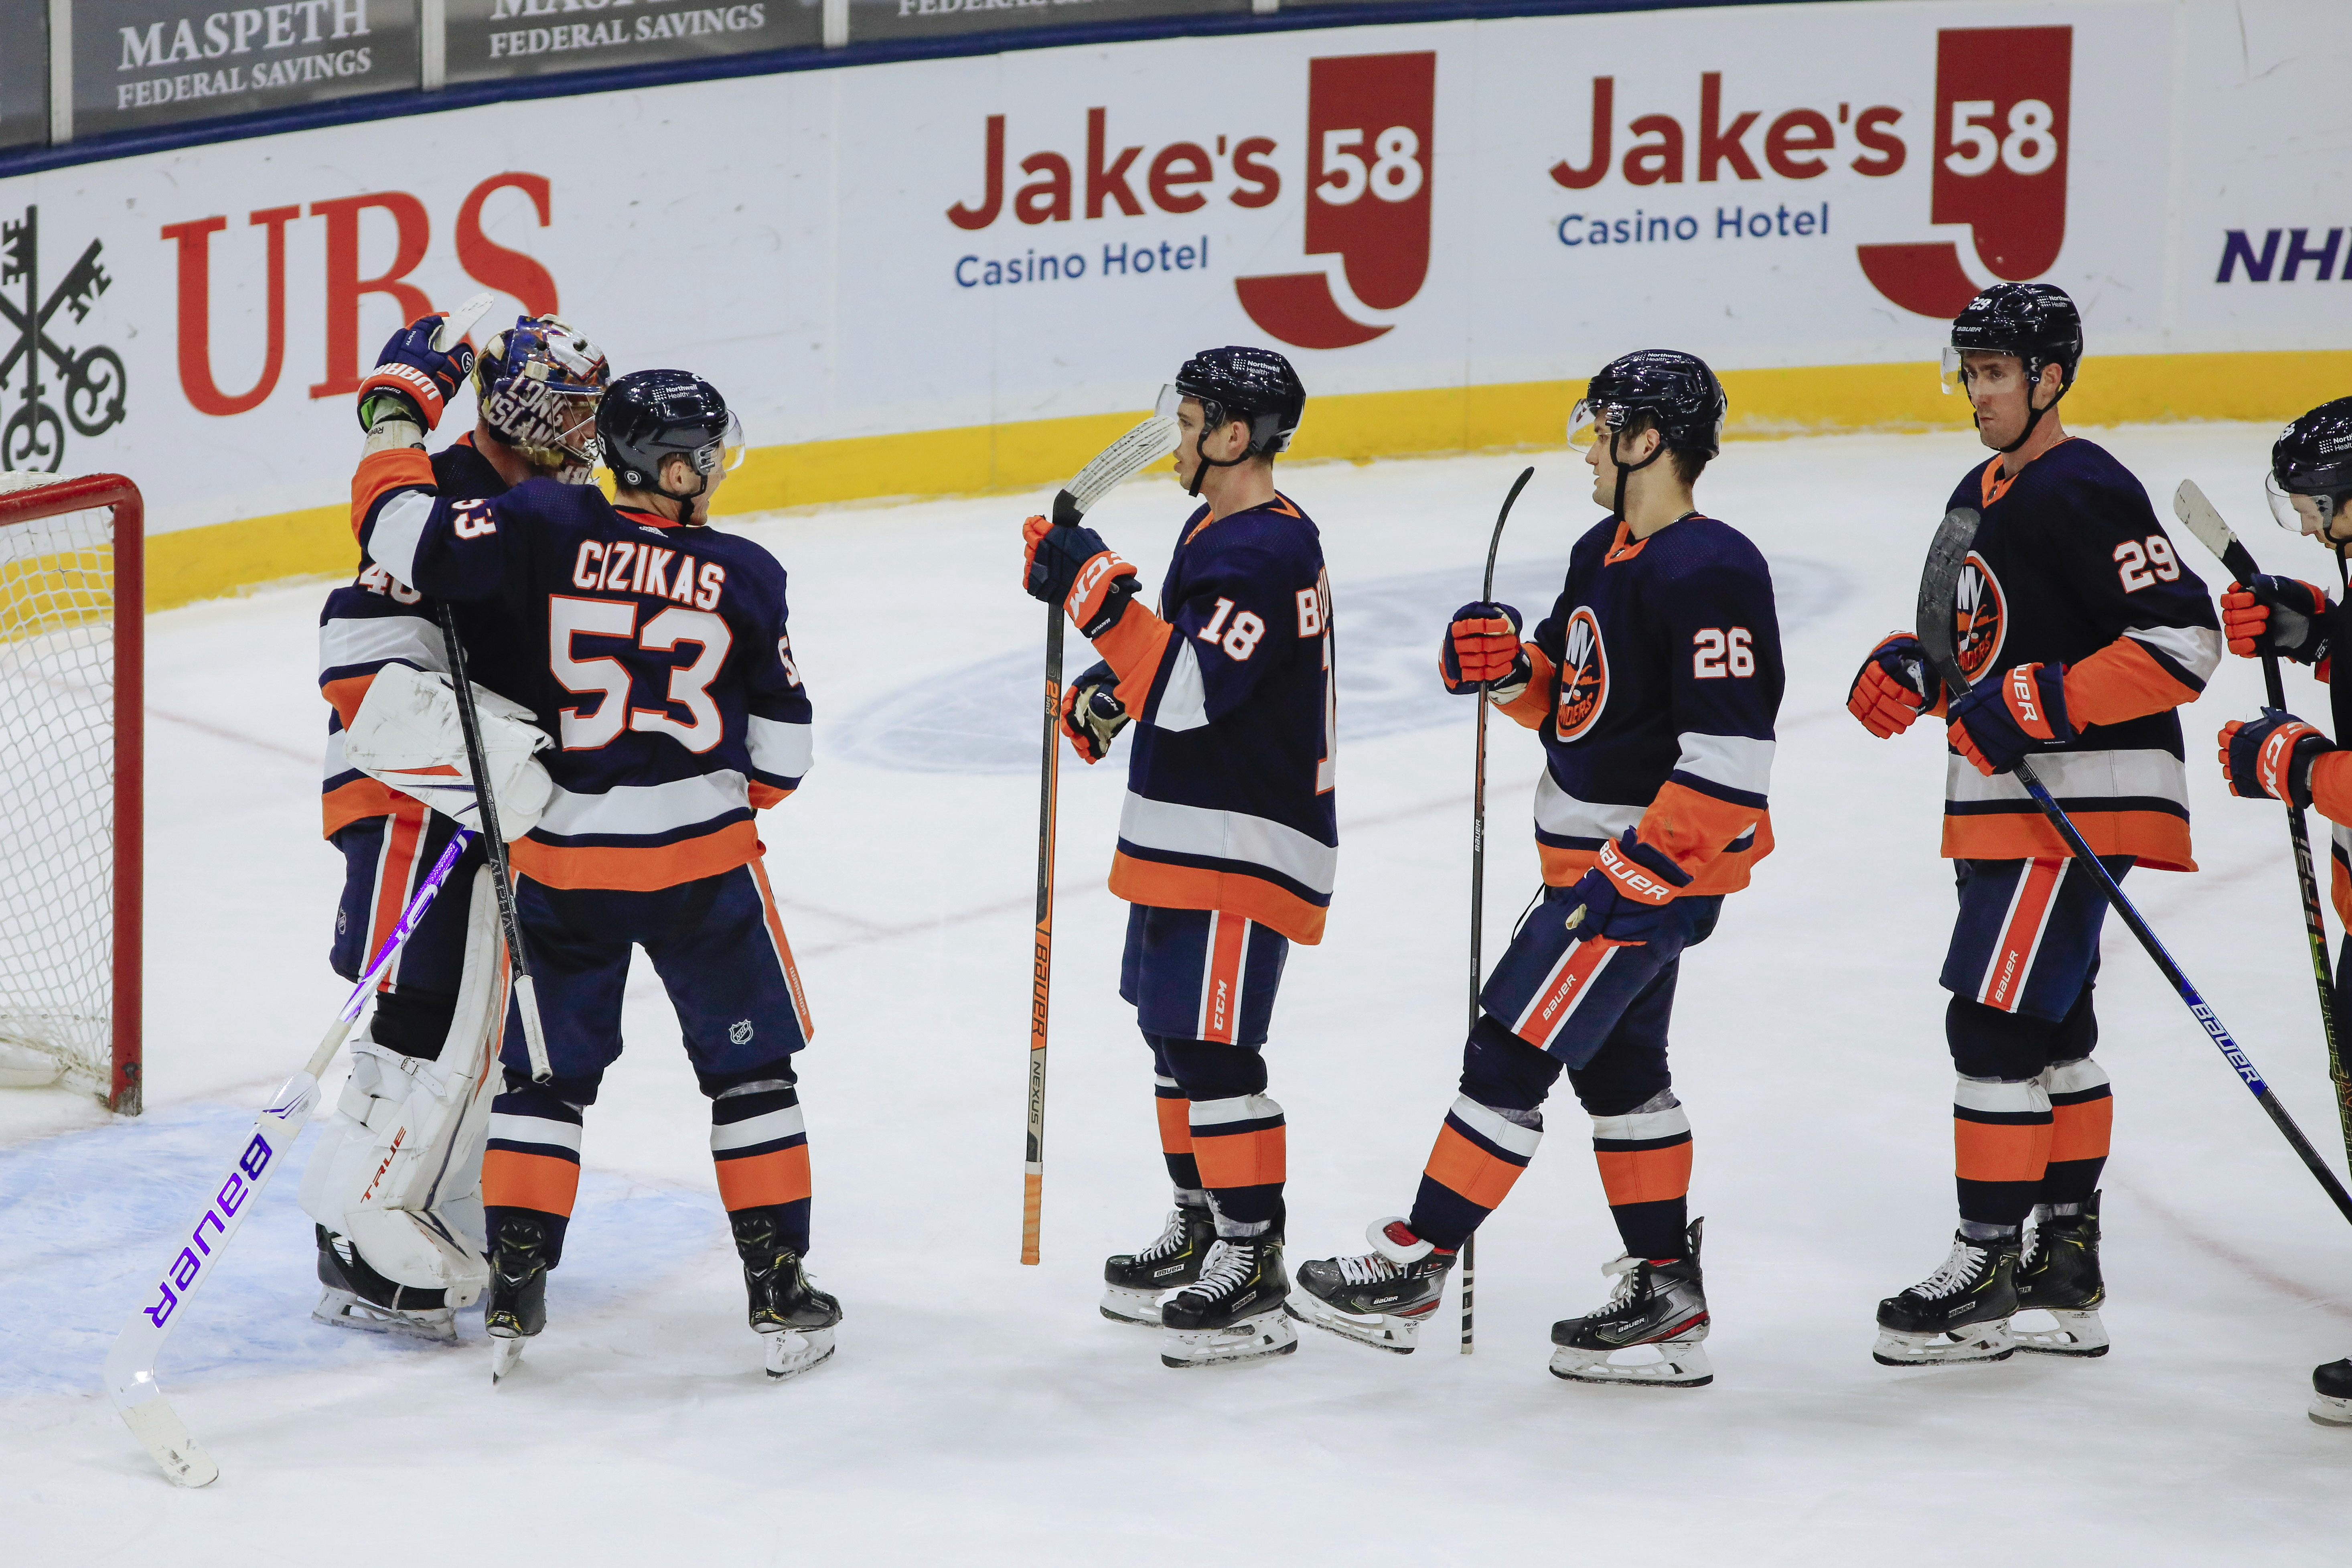 NHL How to LIVE STREAM FREE the Buffalo Sabres at New York Islanders Sunday (3-7-21)